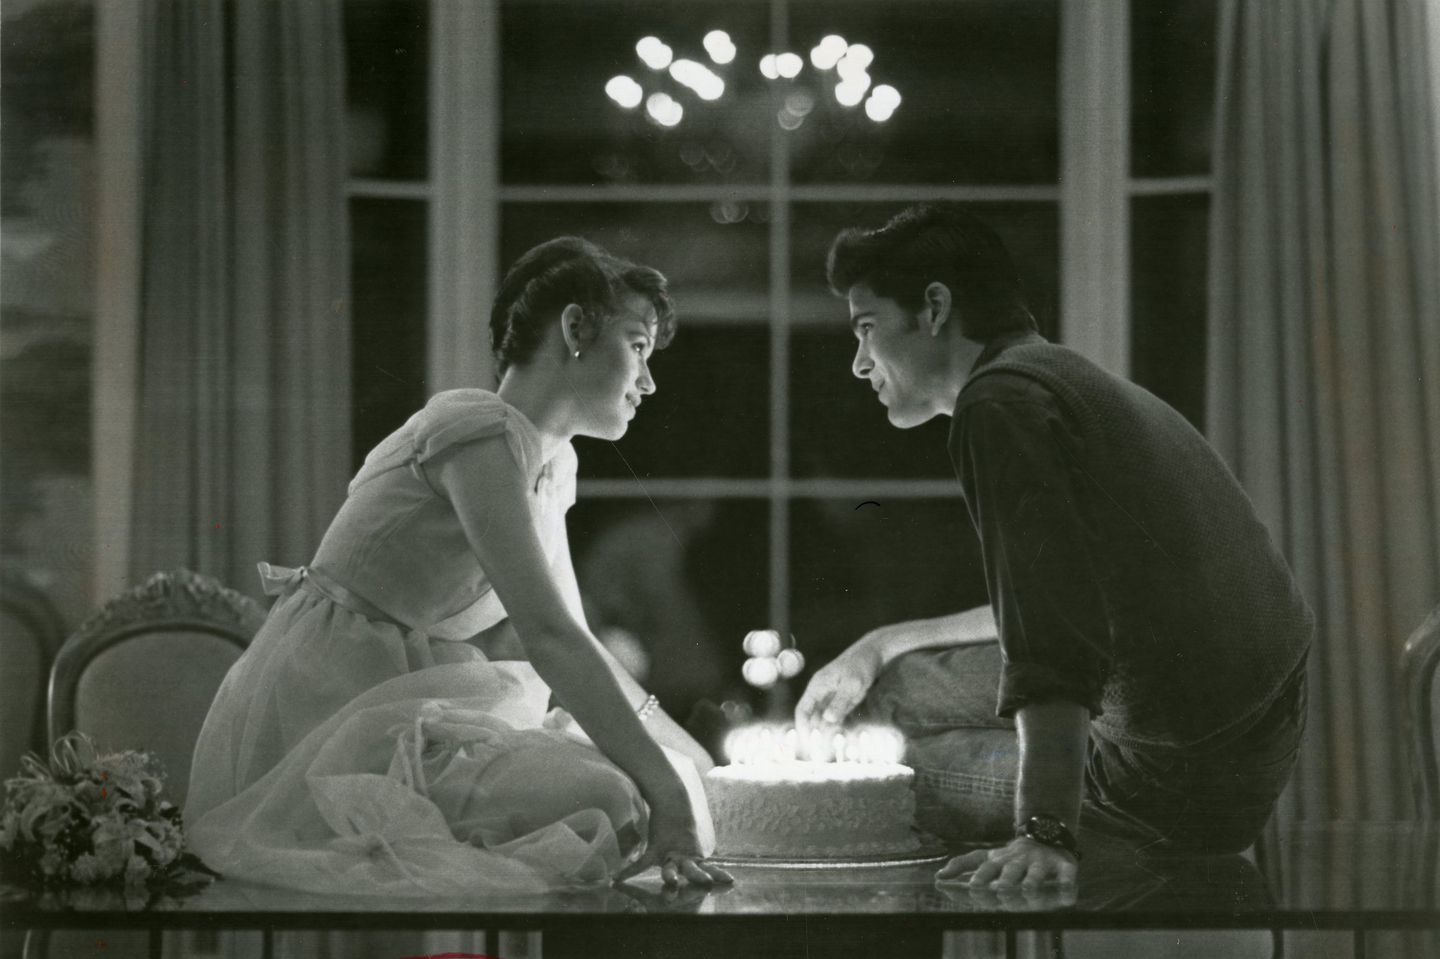 Molly Ringwald and Michael Schoeffling in the 1984 film "Sixteen Candles."